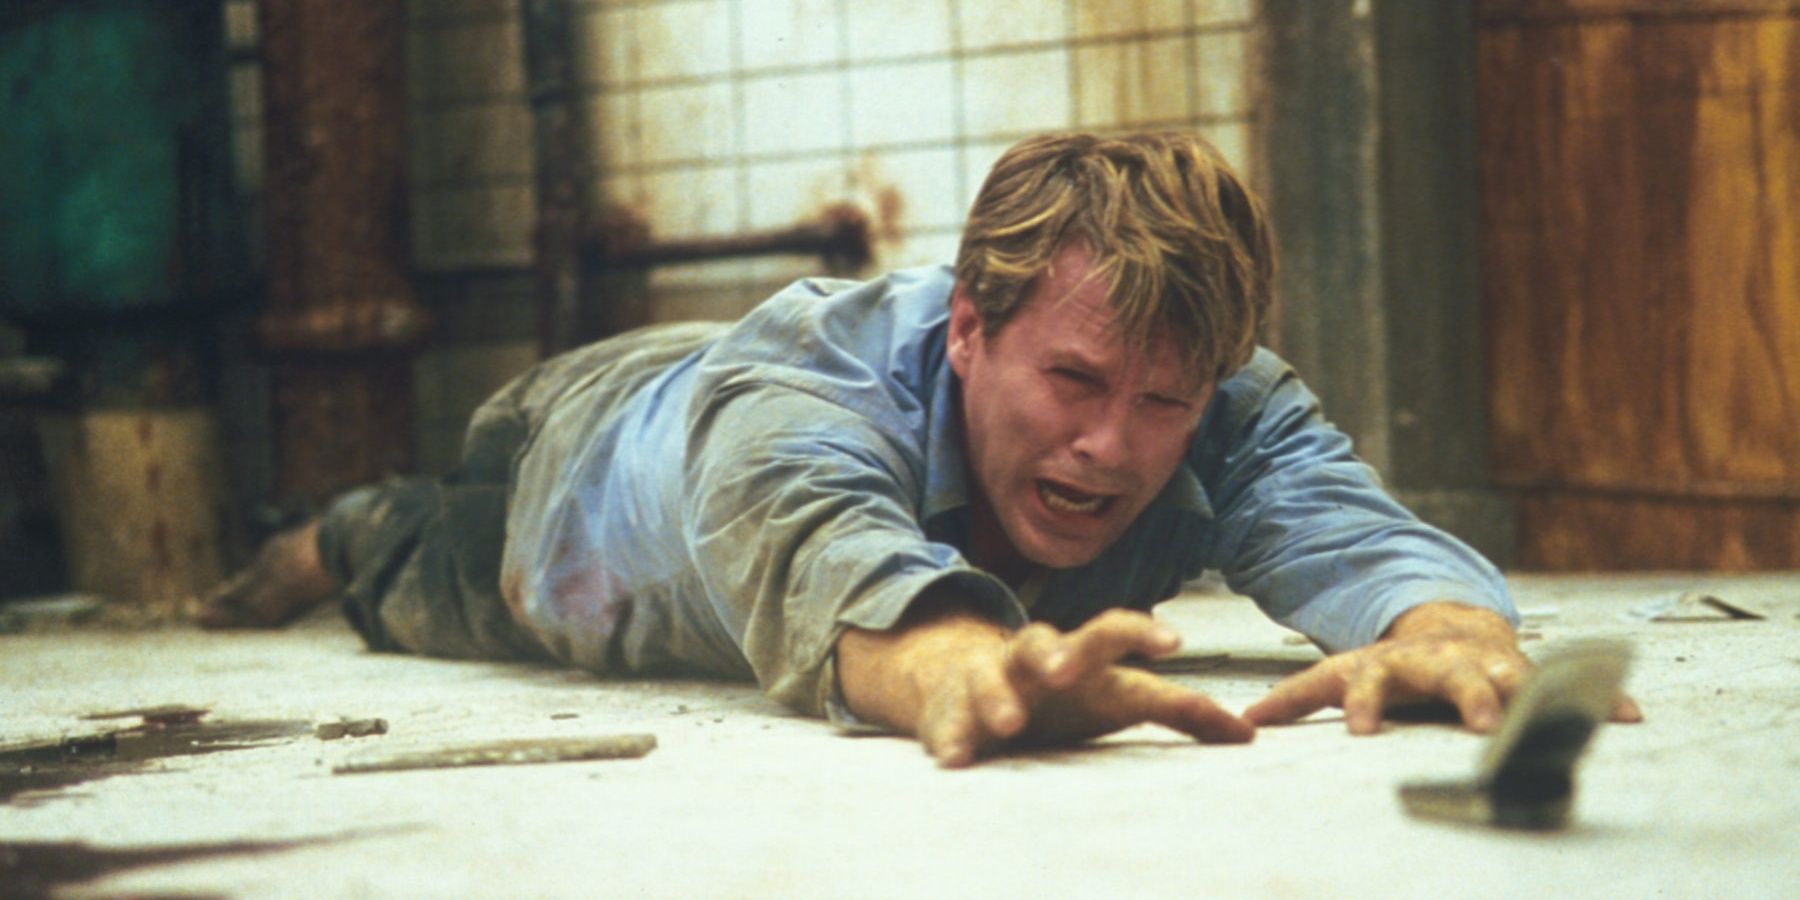 Cary Elwes reaching for the saw in Saw